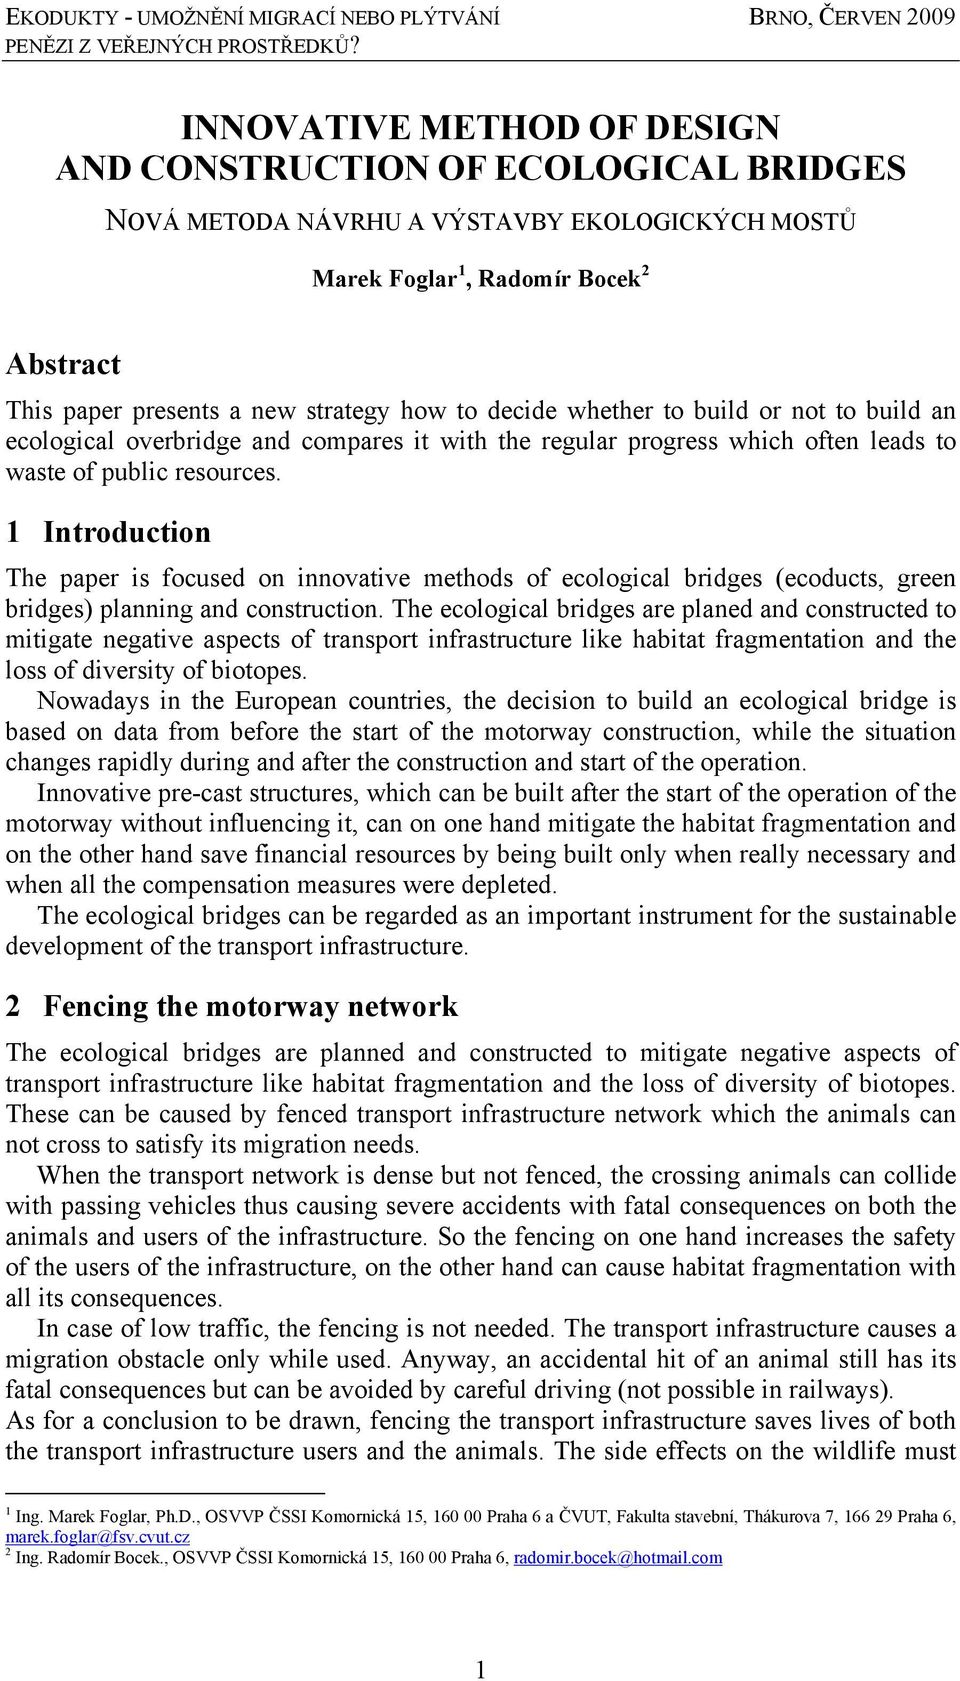 1 Introduction The paper is focused on innovative methods of ecological bridges (ecoducts, green bridges) planning and construction.